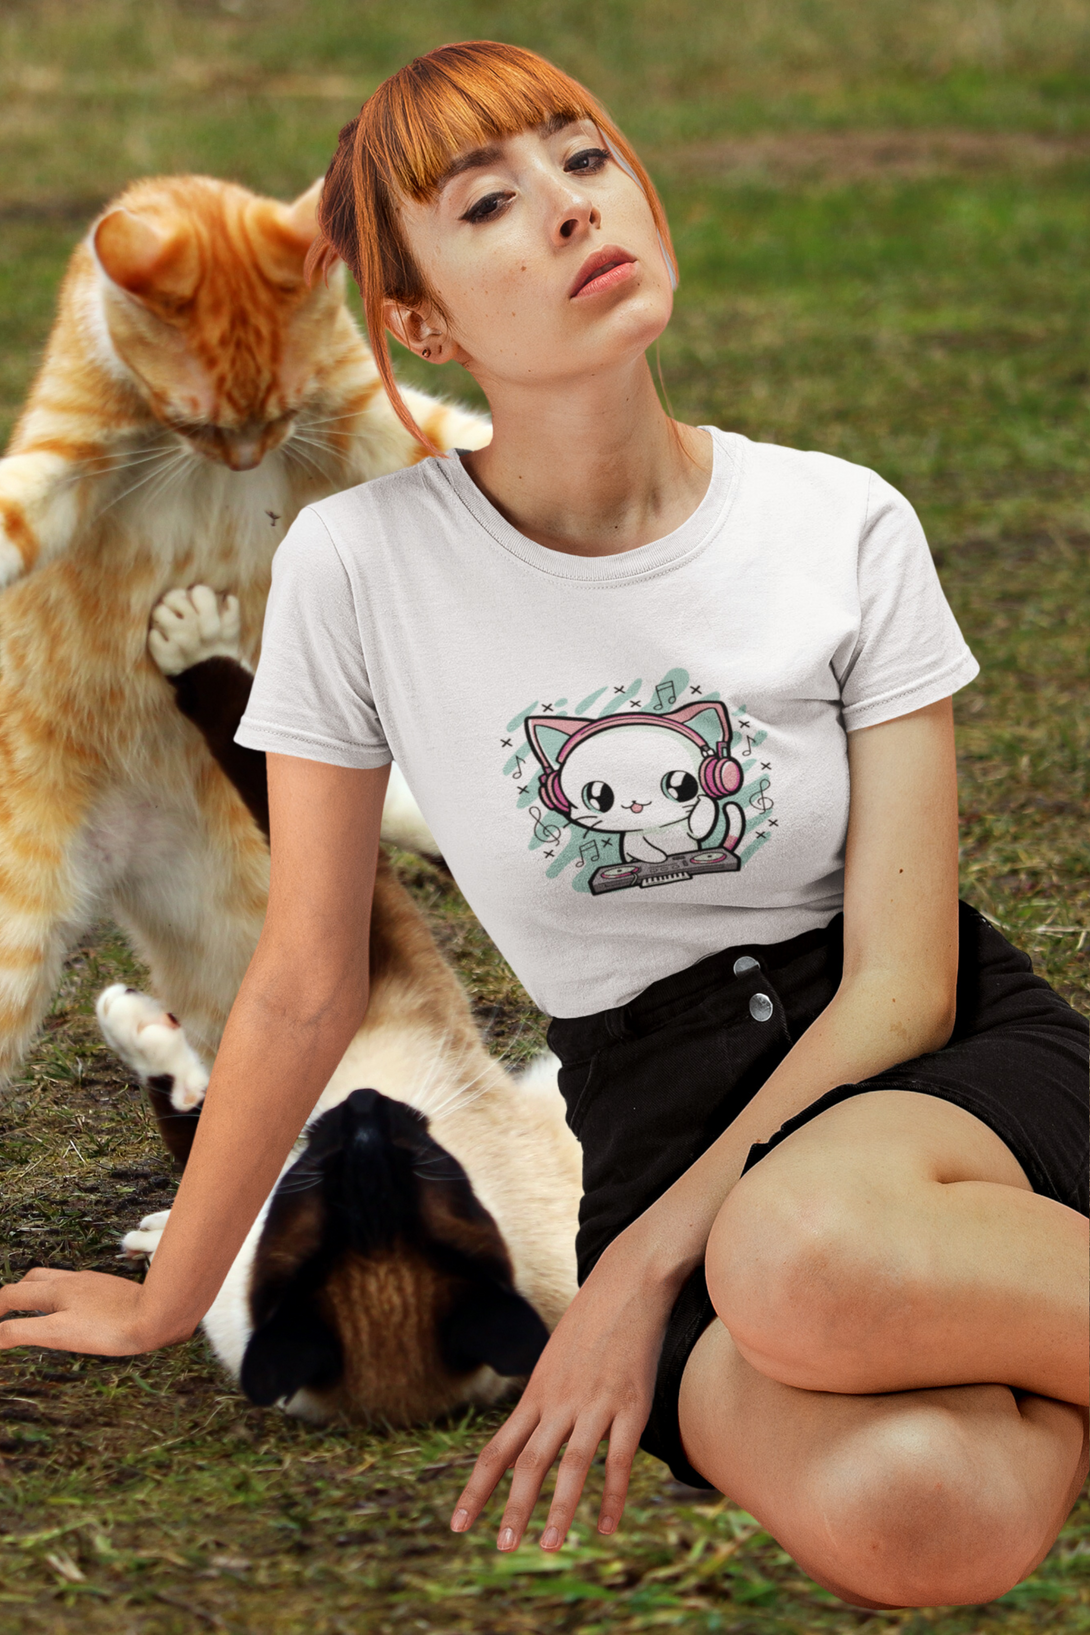 Meow Mix Printed T-Shirt For Women - WowWaves - 2